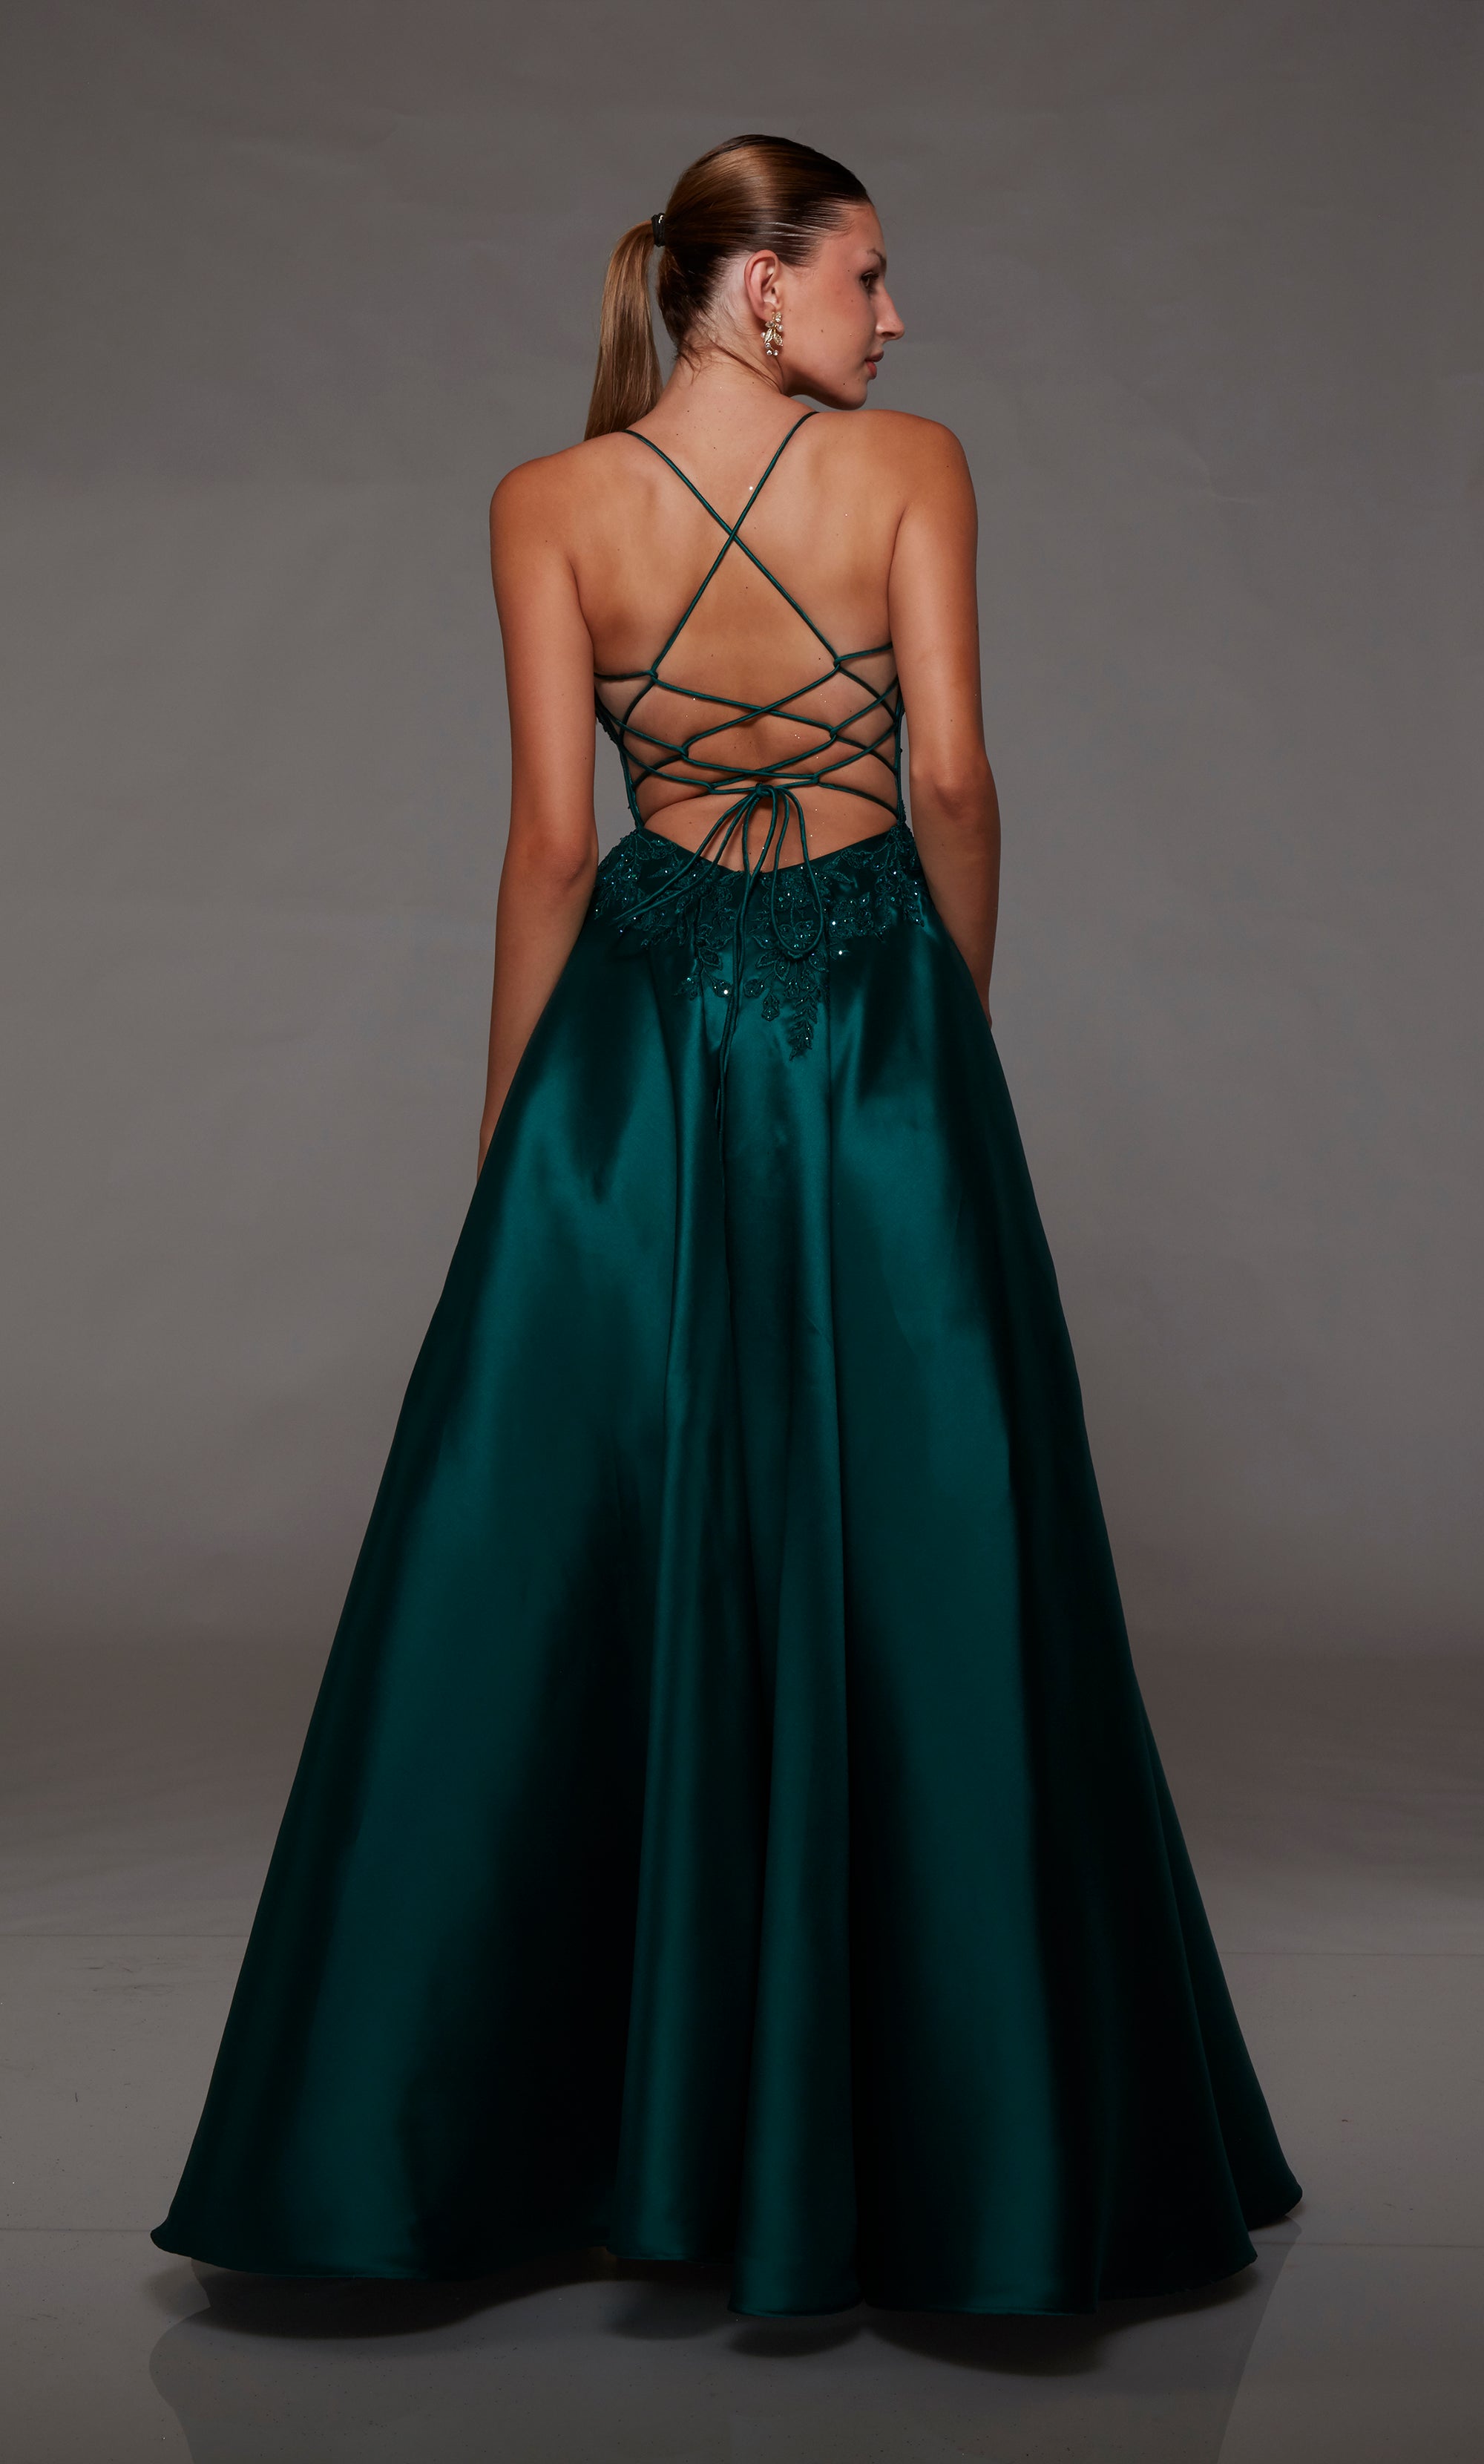 Pine green ball gown spotlighting an plunging corset bodice with beaded floral lace appliques and an strappy lace-up back for an enchanting and stylish look.